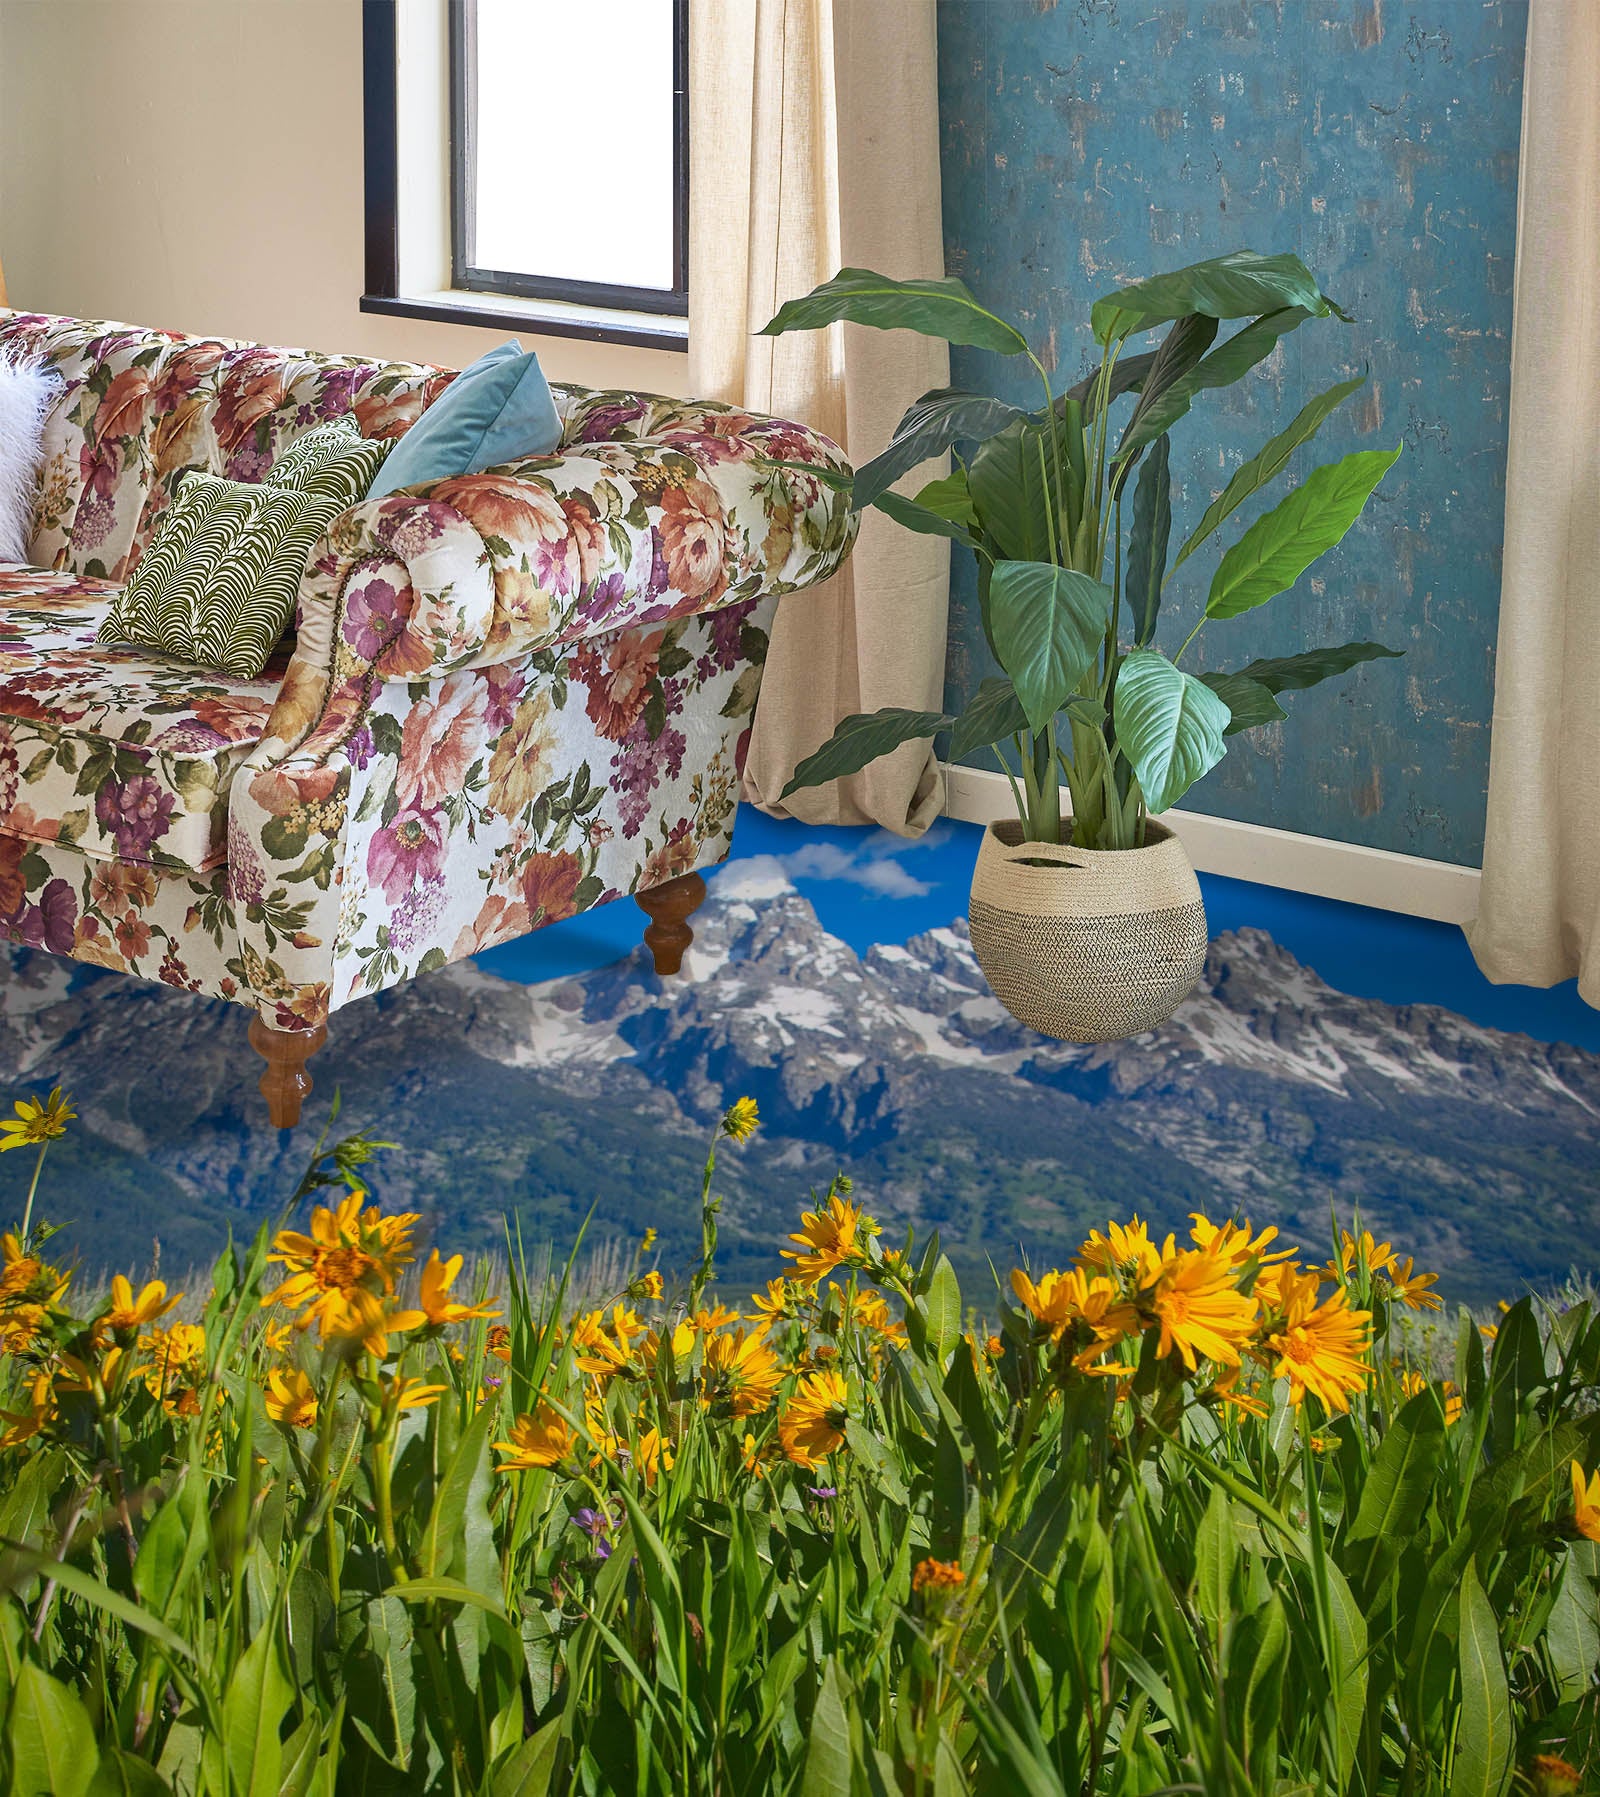 3D Snow Mountain Meadow Flowers 98188 Kathy Barefield Floor Mural  Wallpaper Murals Self-Adhesive Removable Print Epoxy